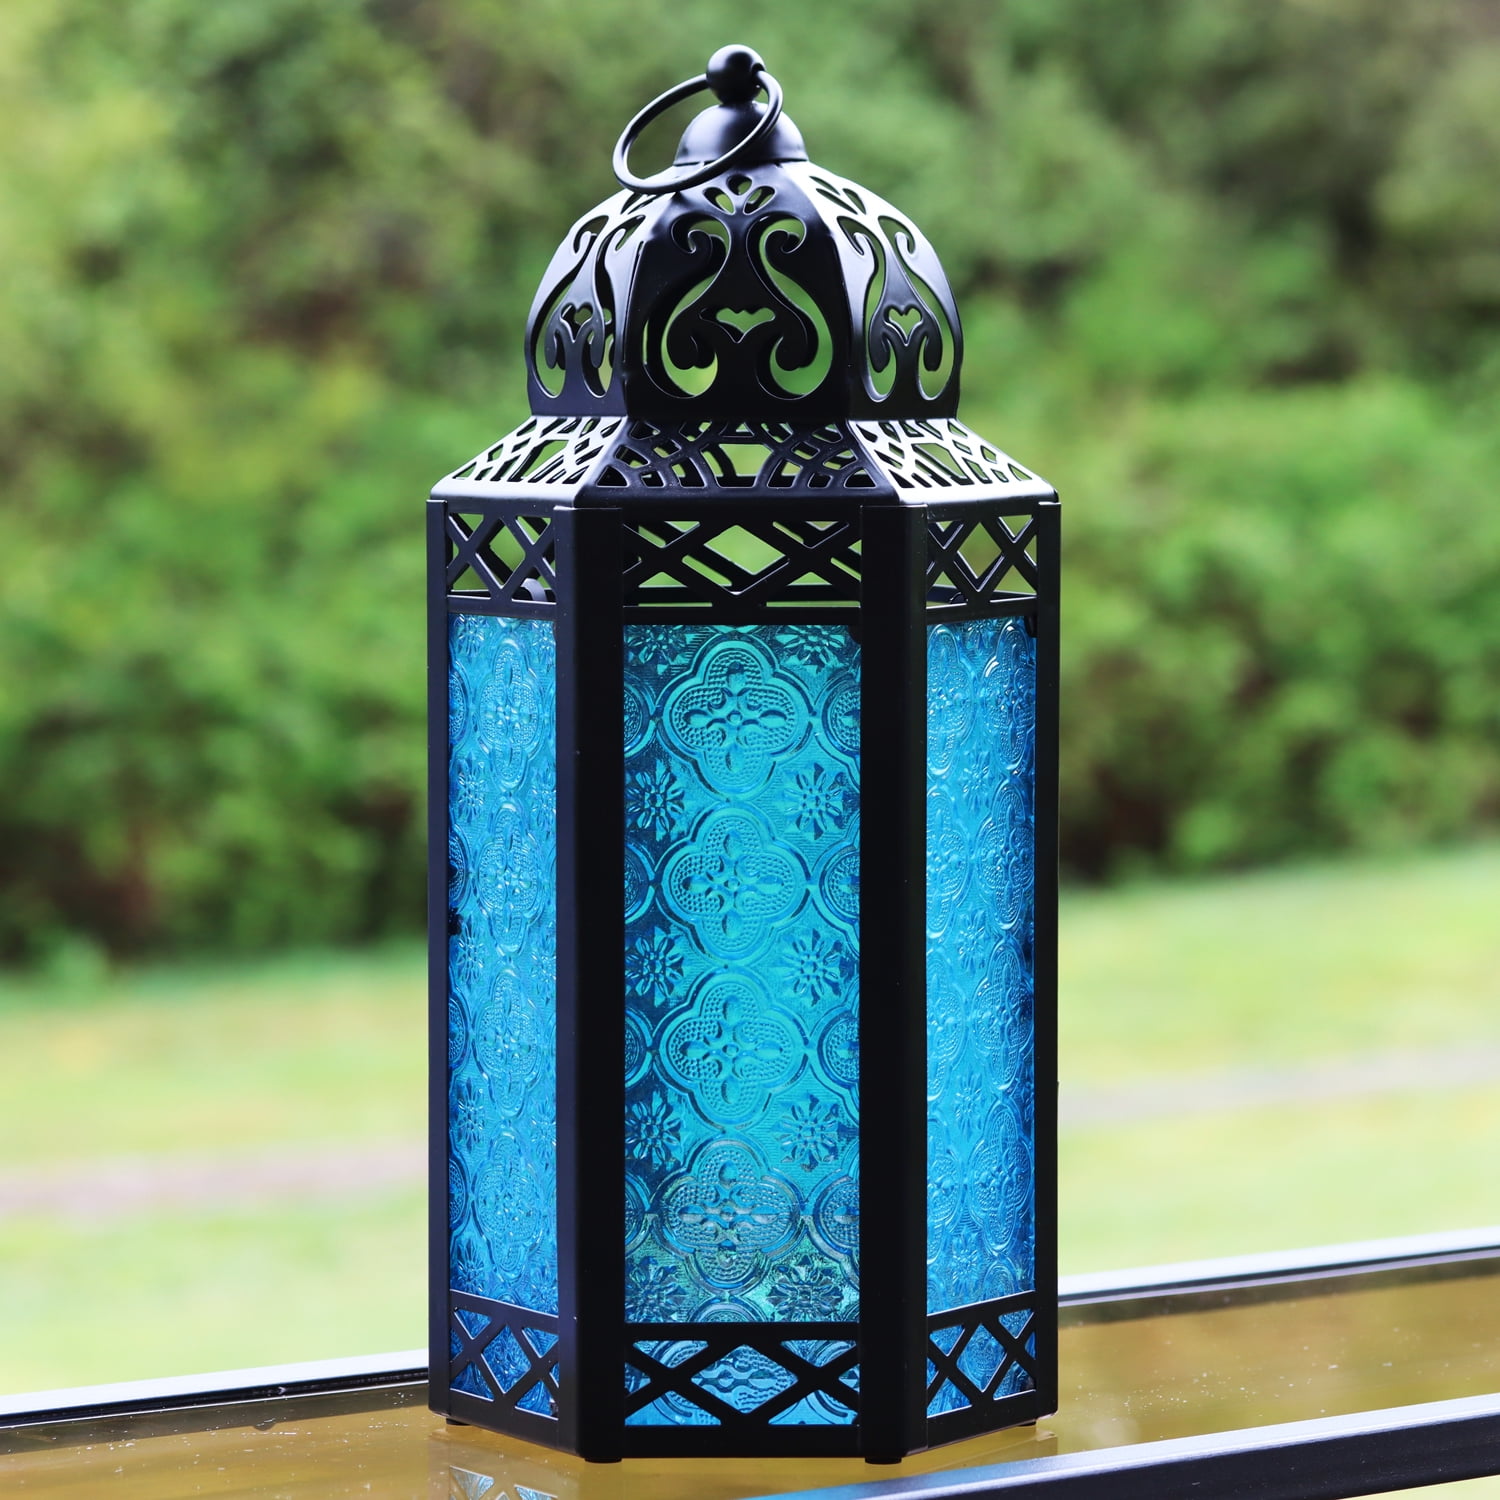 Hanging Black Moroccan 13" tall Candle holder Lantern Lamp light outdoor terrace 